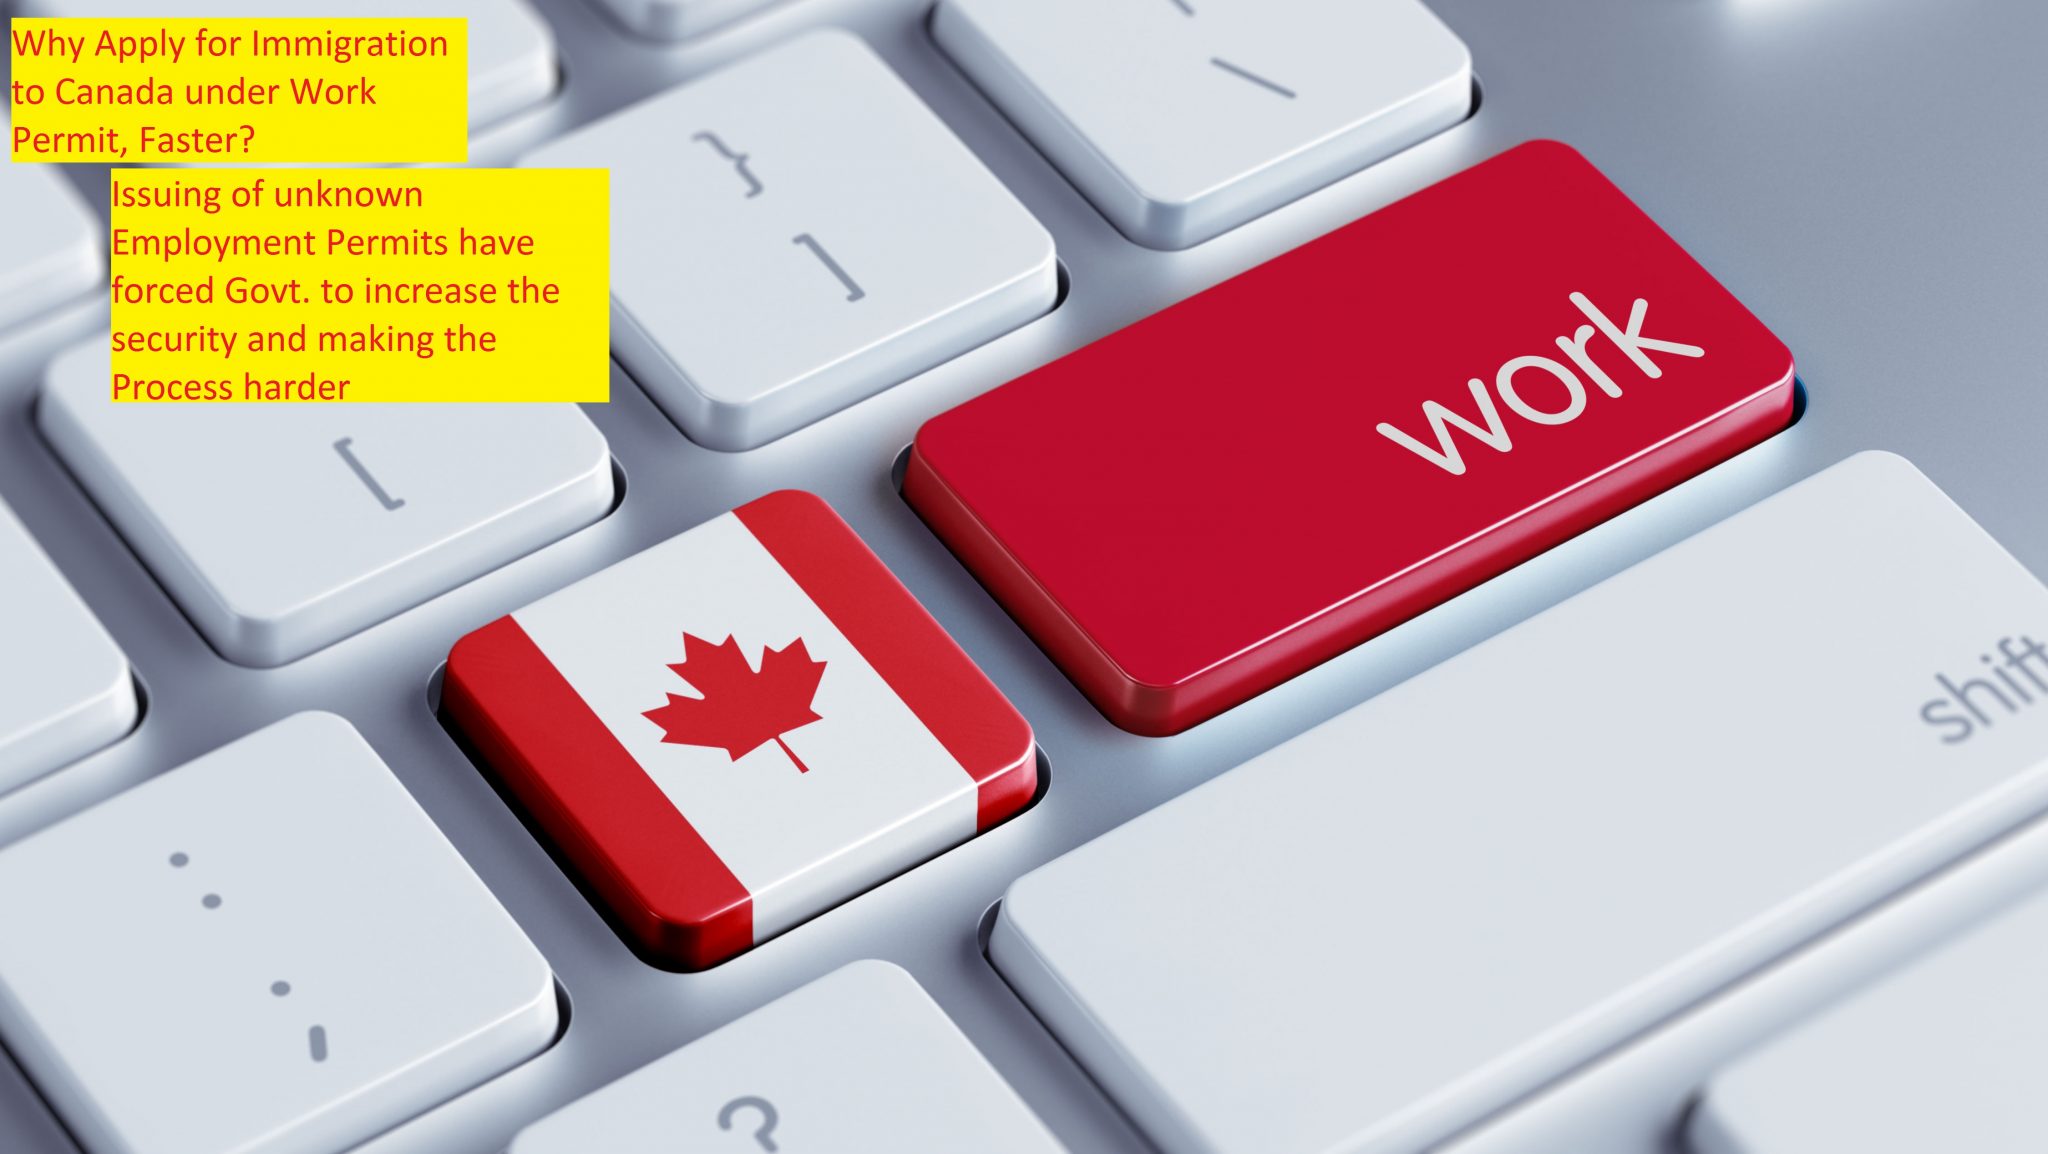 Why Apply for Immigration to Canada under Work Permit, Faster?